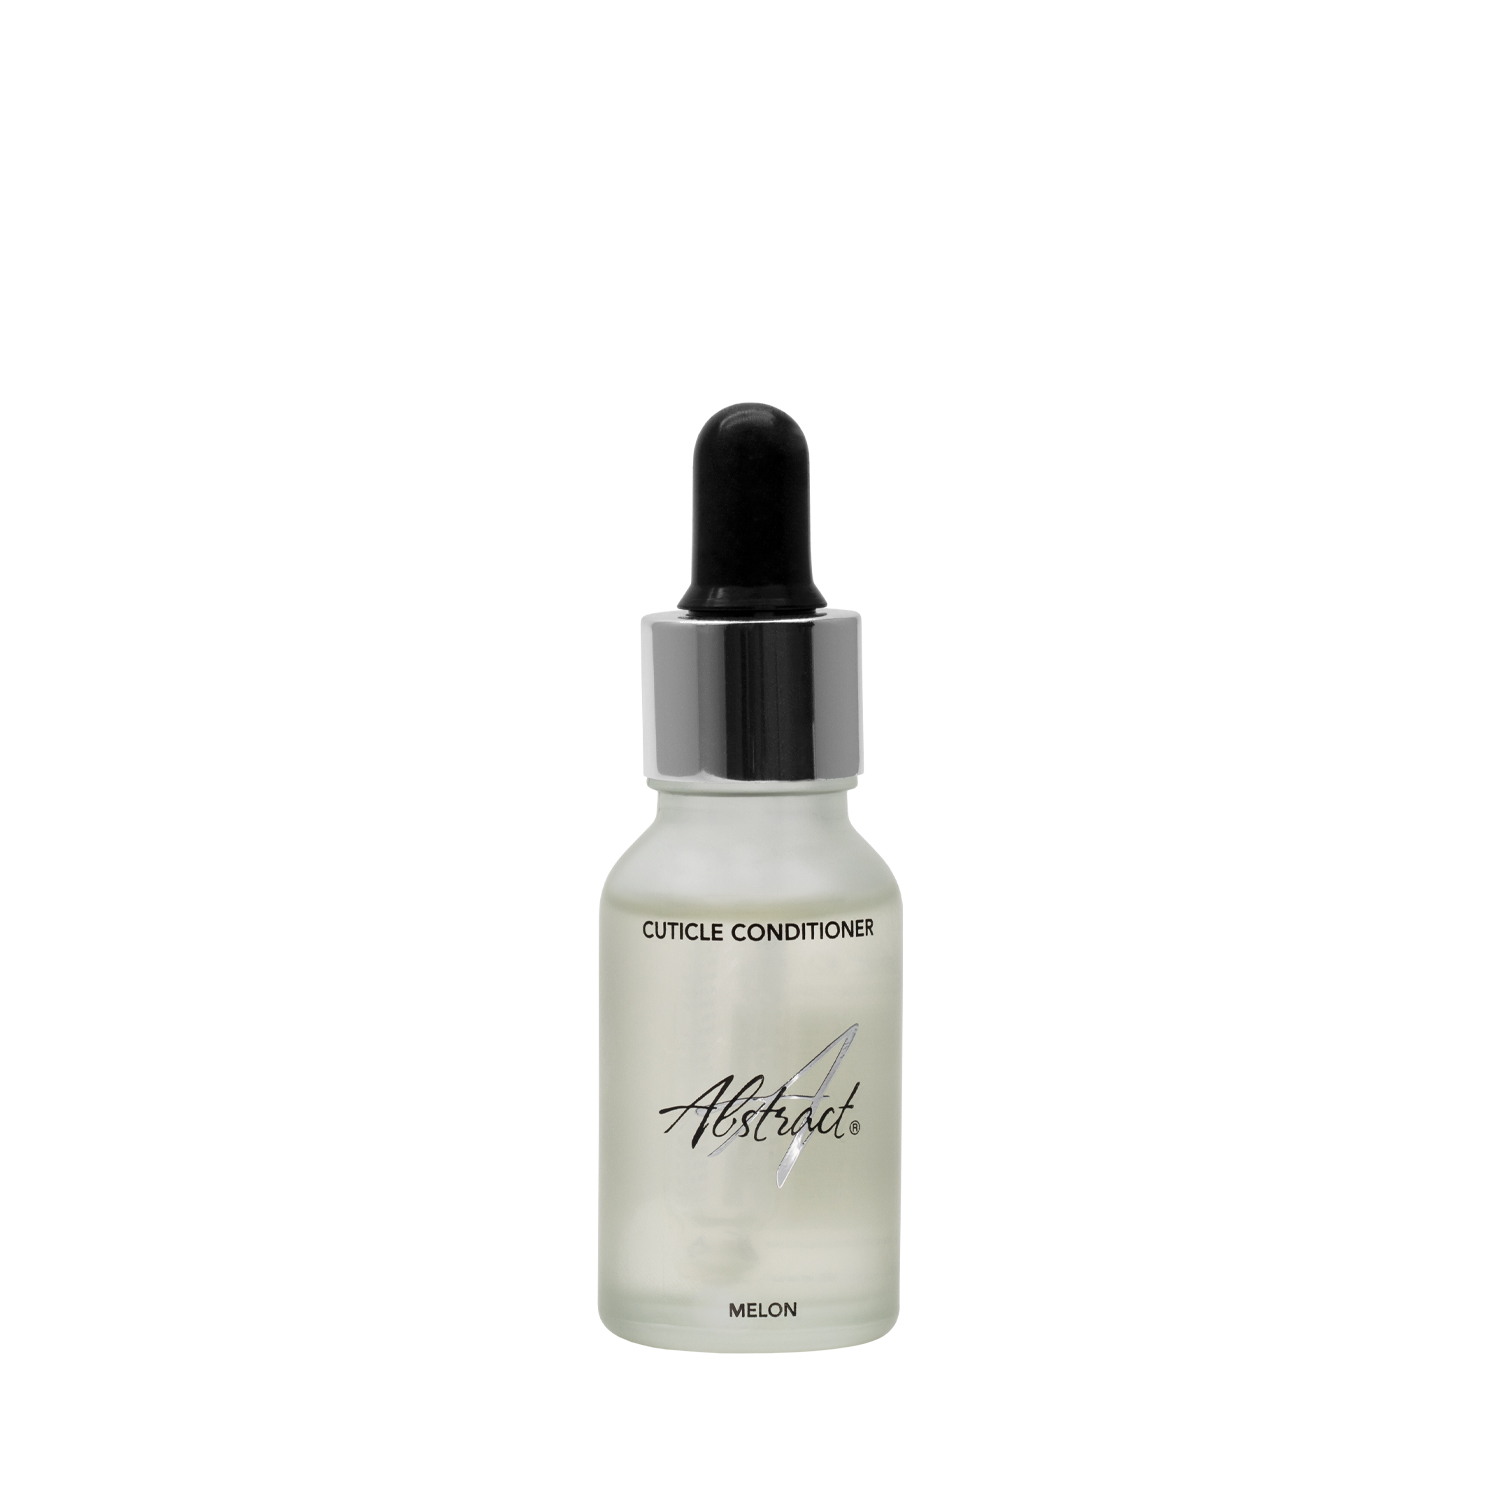 Cuticle Conditioner MELON 15ml, Abstract  | 281741